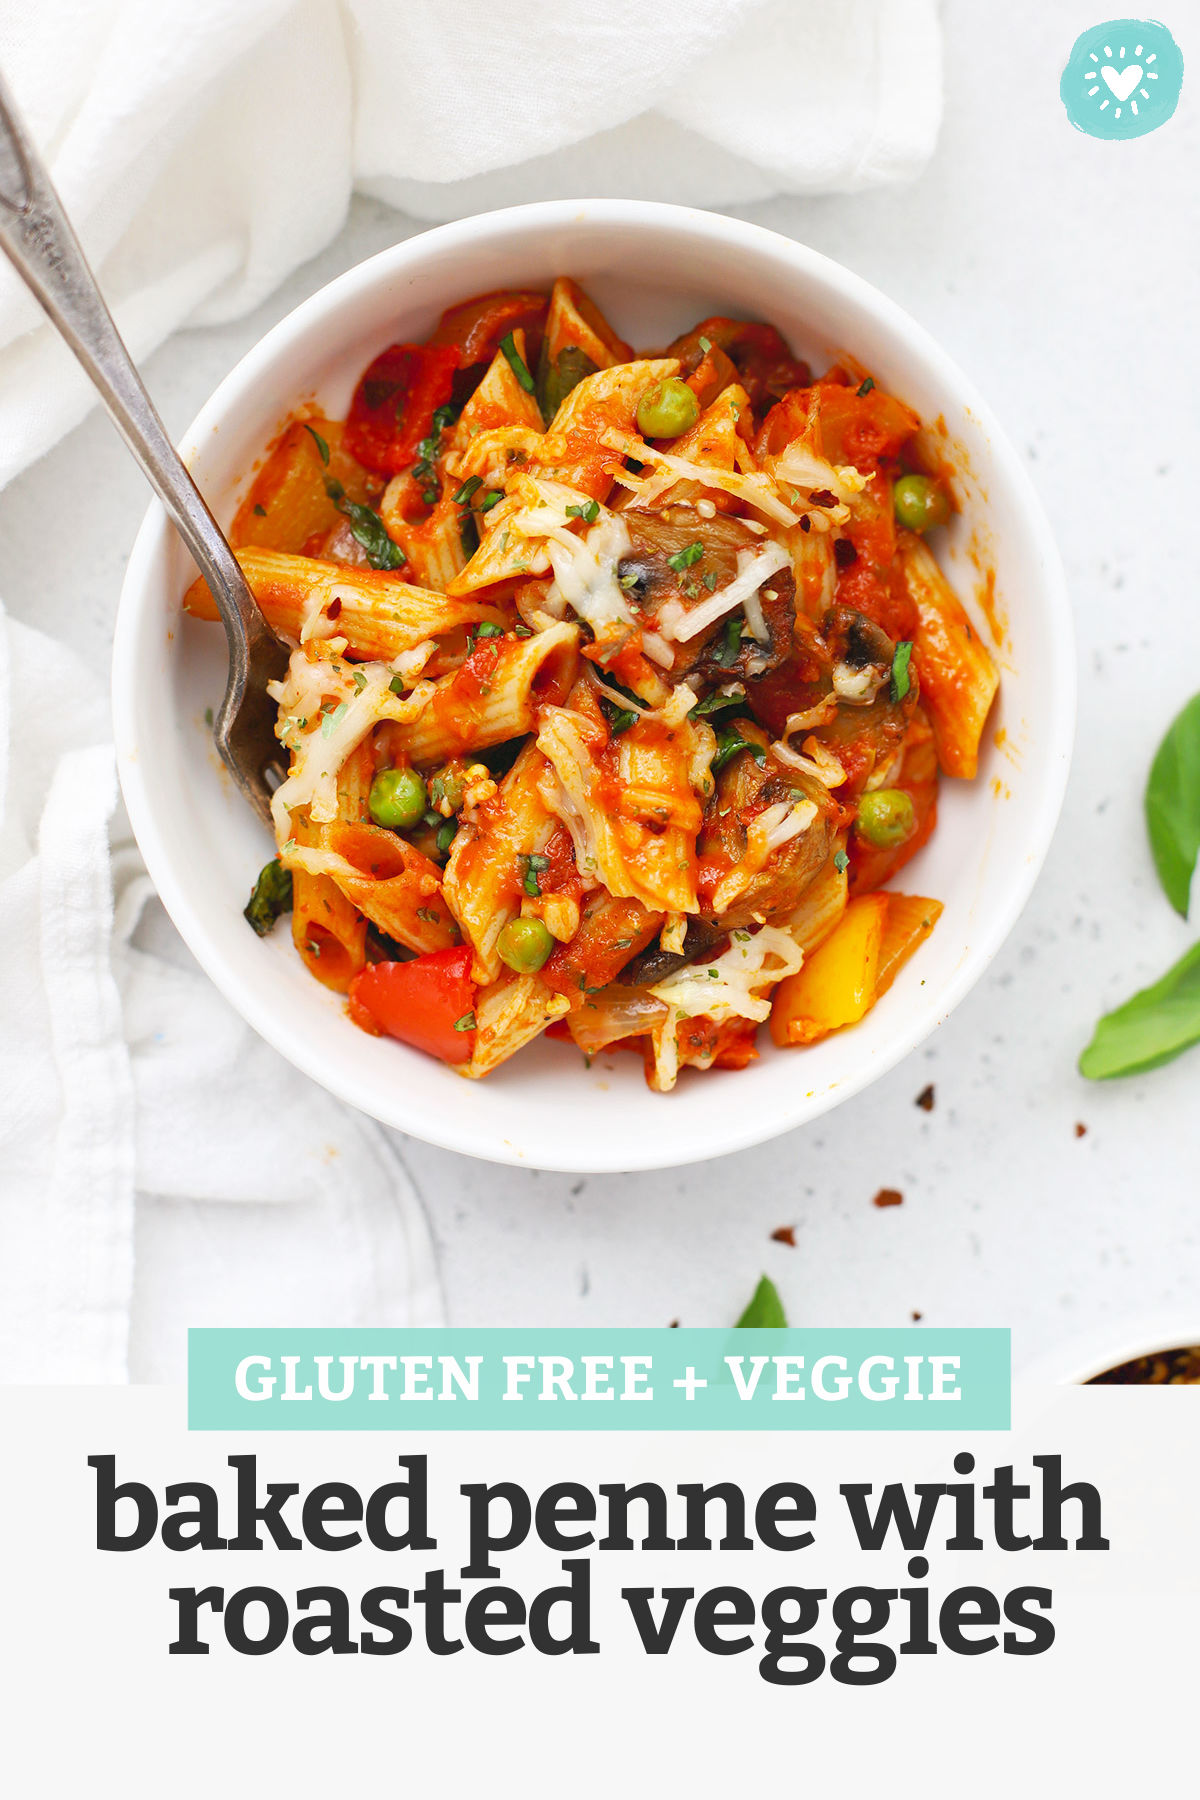 A white bowl of baked penne with roasted veggies with text overlay that reads "Gluten-Free + Veggie Baked Penne with Roasted Veggies"